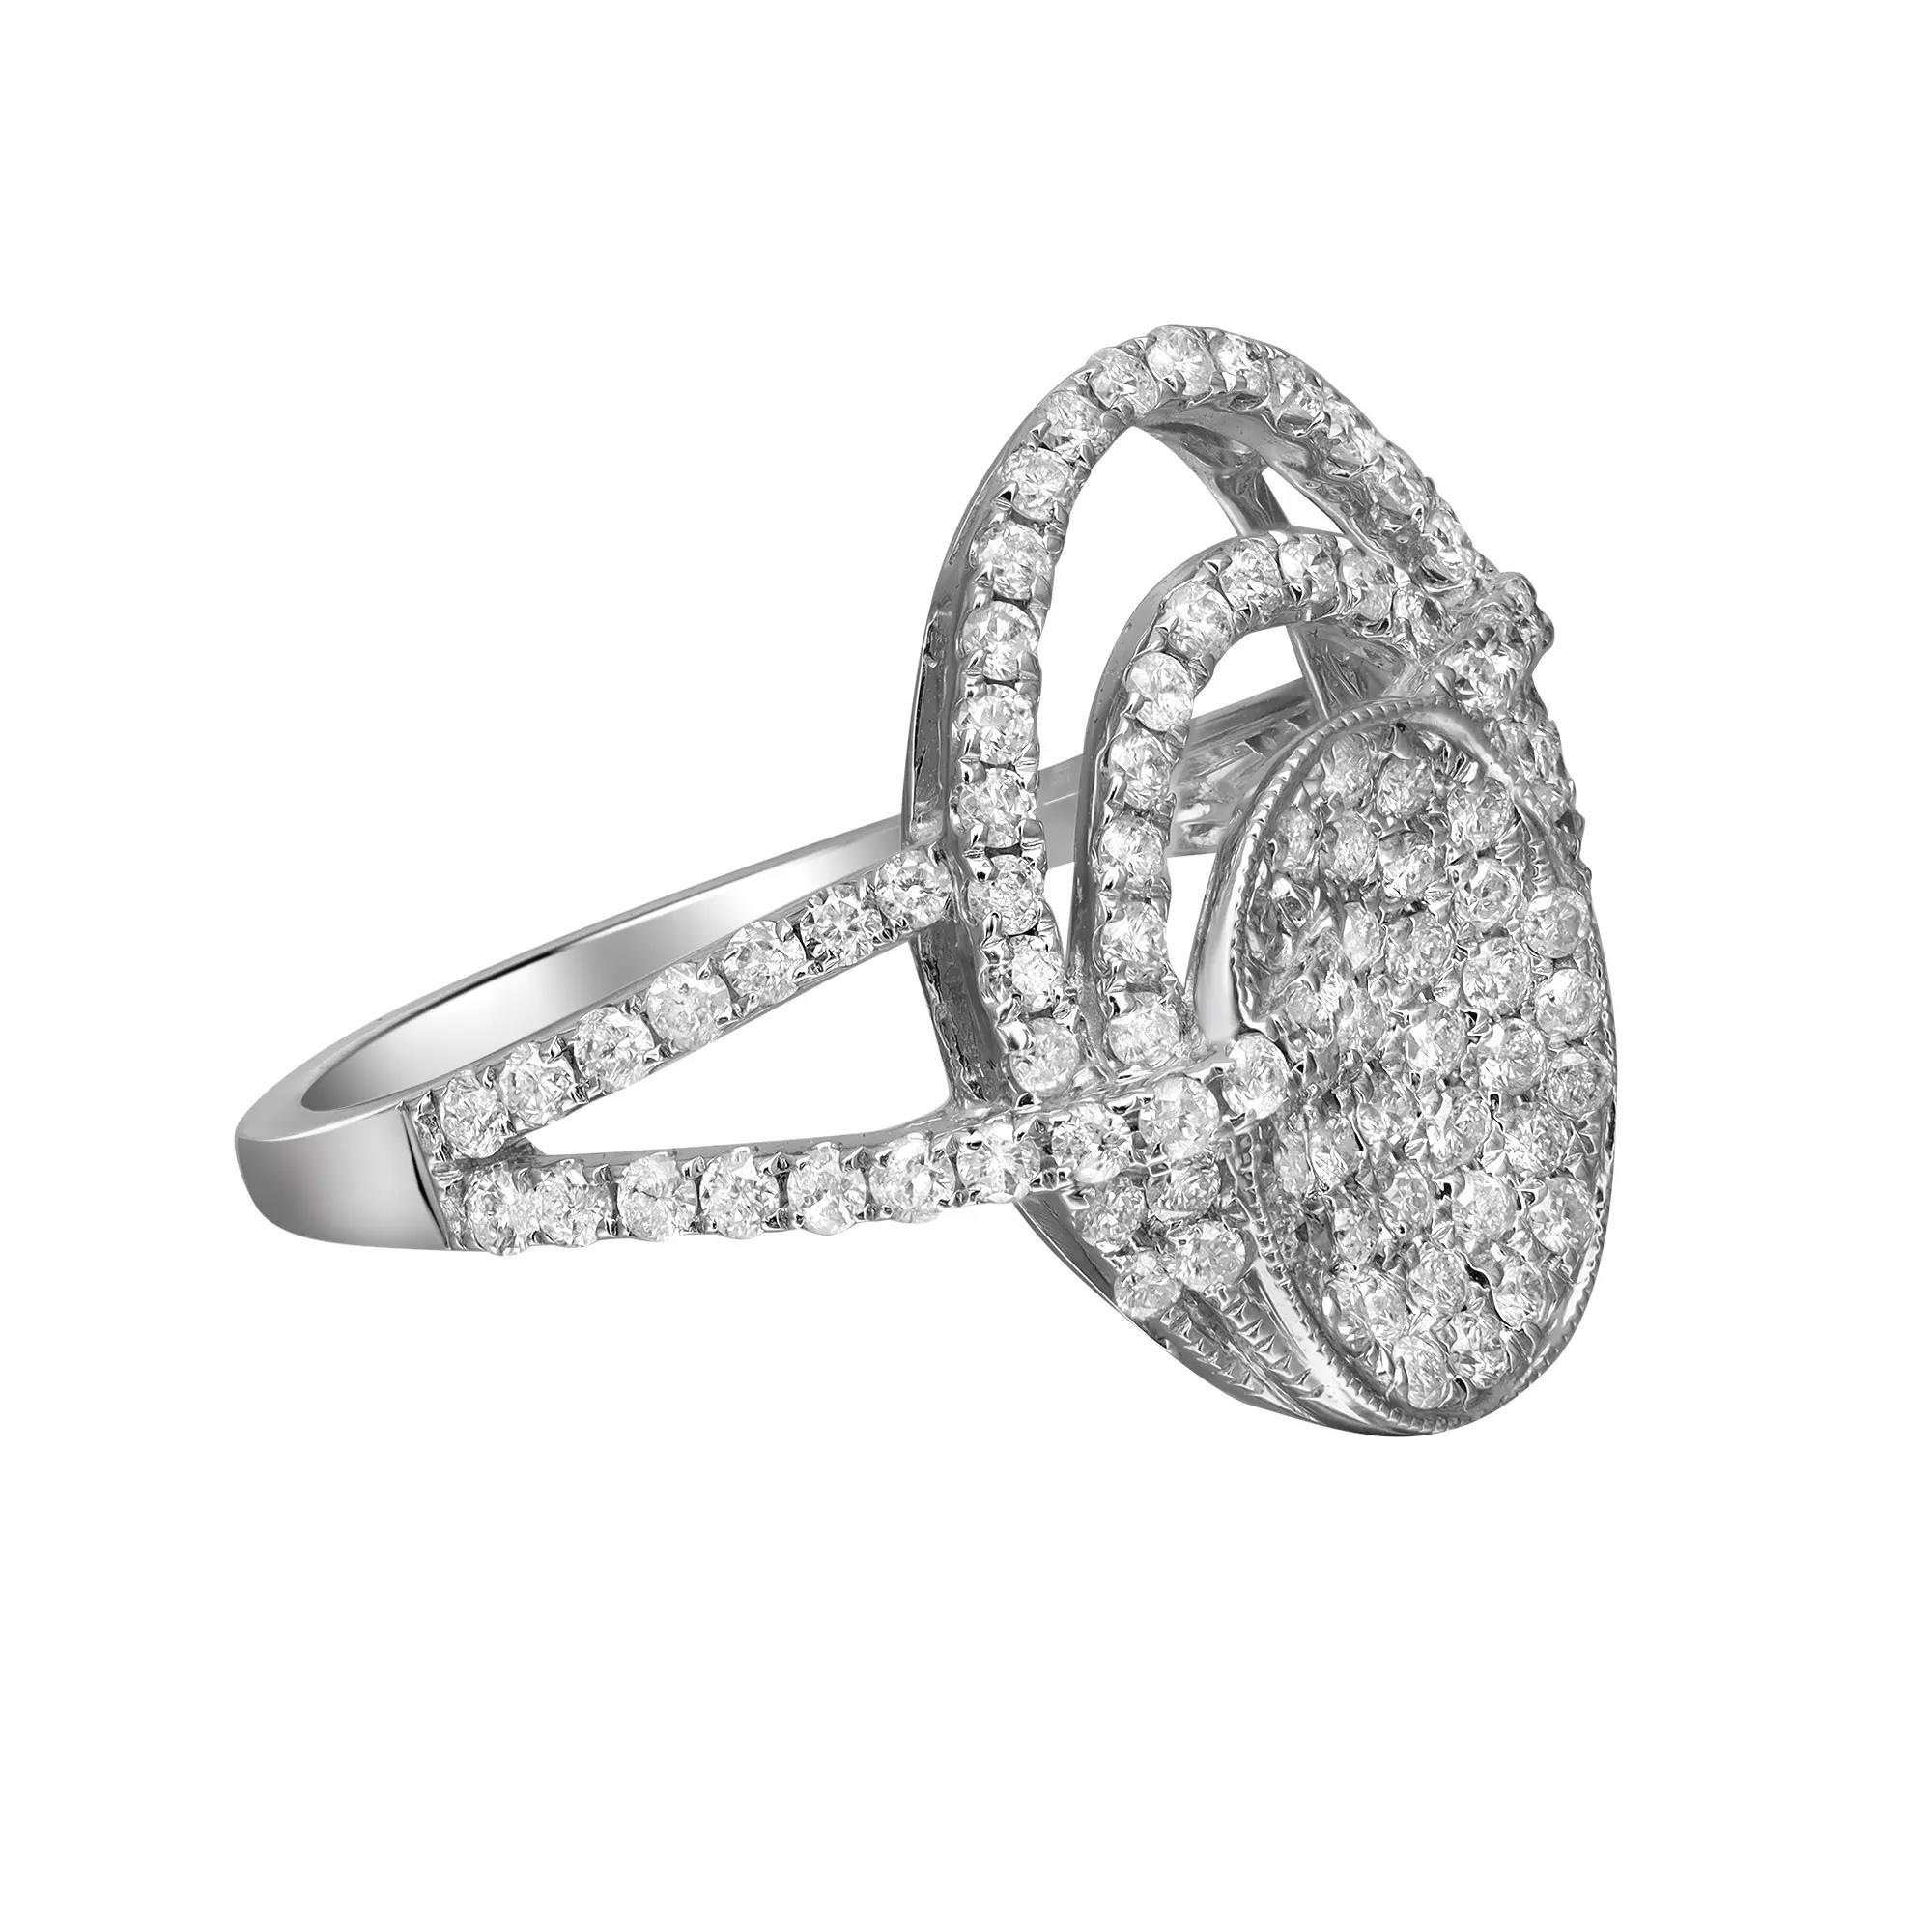 Presenting a luxury and bold natural diamond ring crafted in 14k white gold. This fancy ring is highlighted with 1.03 carats of dazzling pave set white round cut diamonds with I color and SI1 clarity. The ring size is 7.75. Total weight: 4.19 grams.